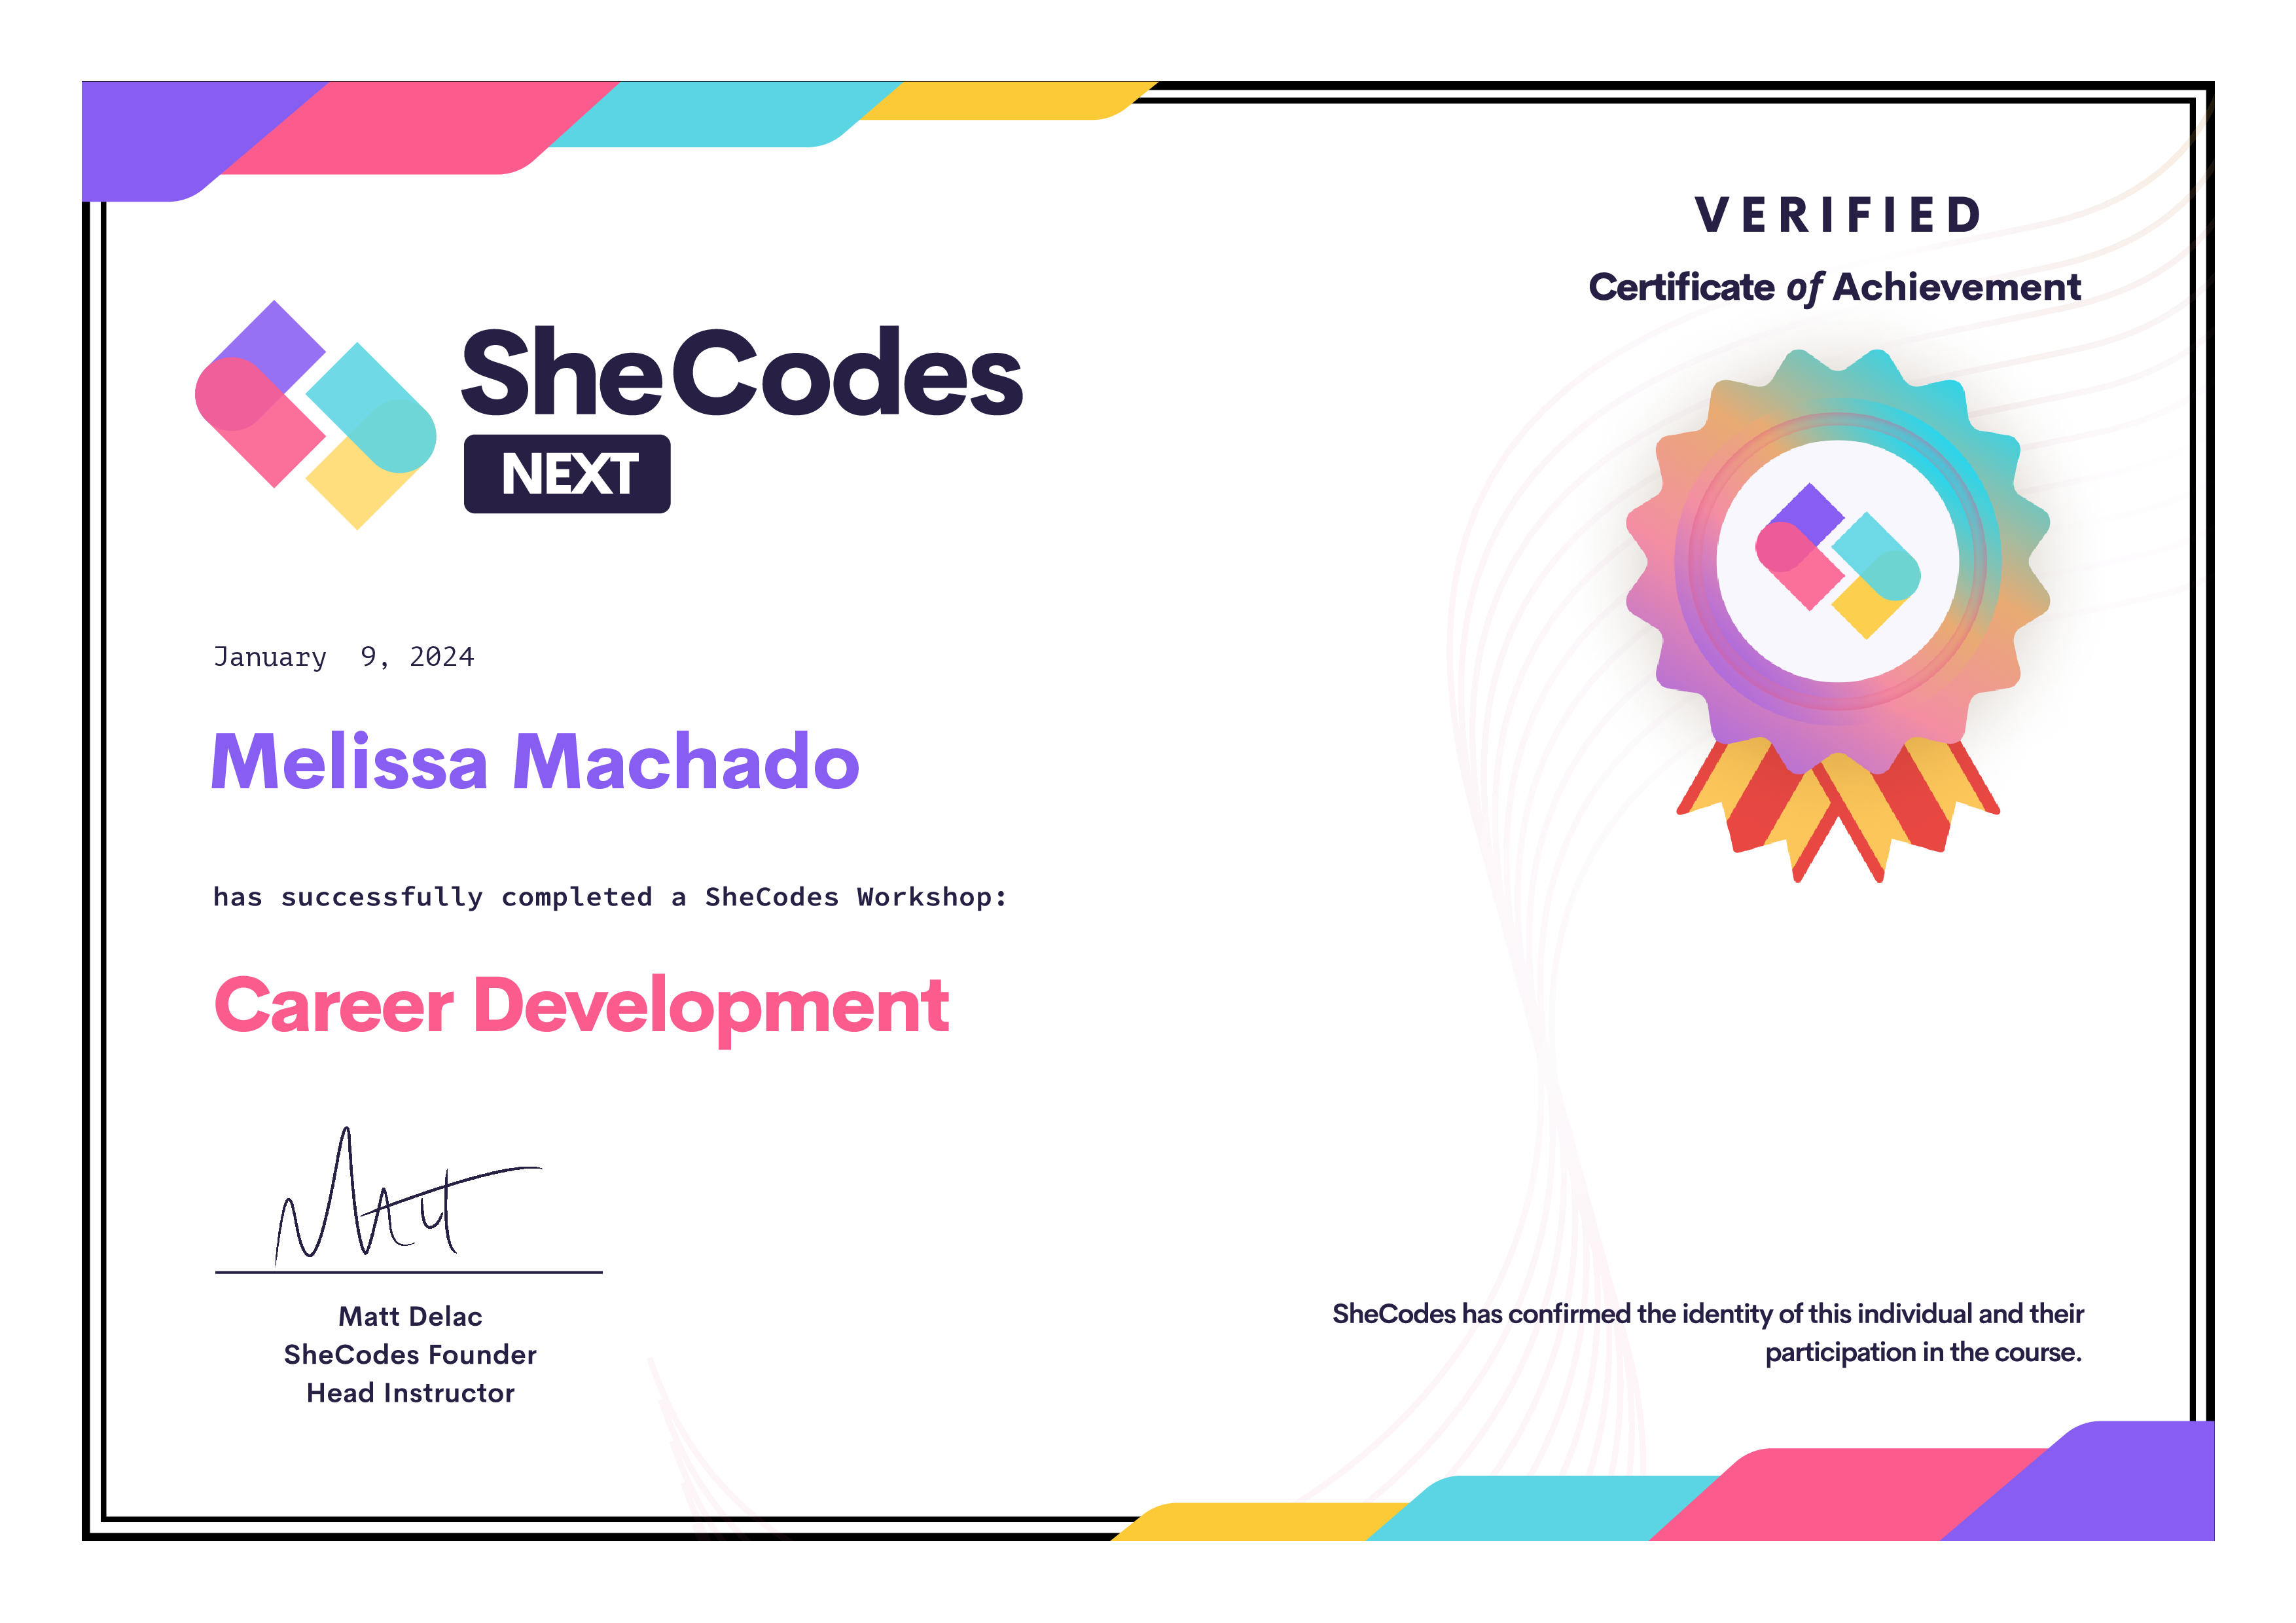 SheCodes Next Certificate